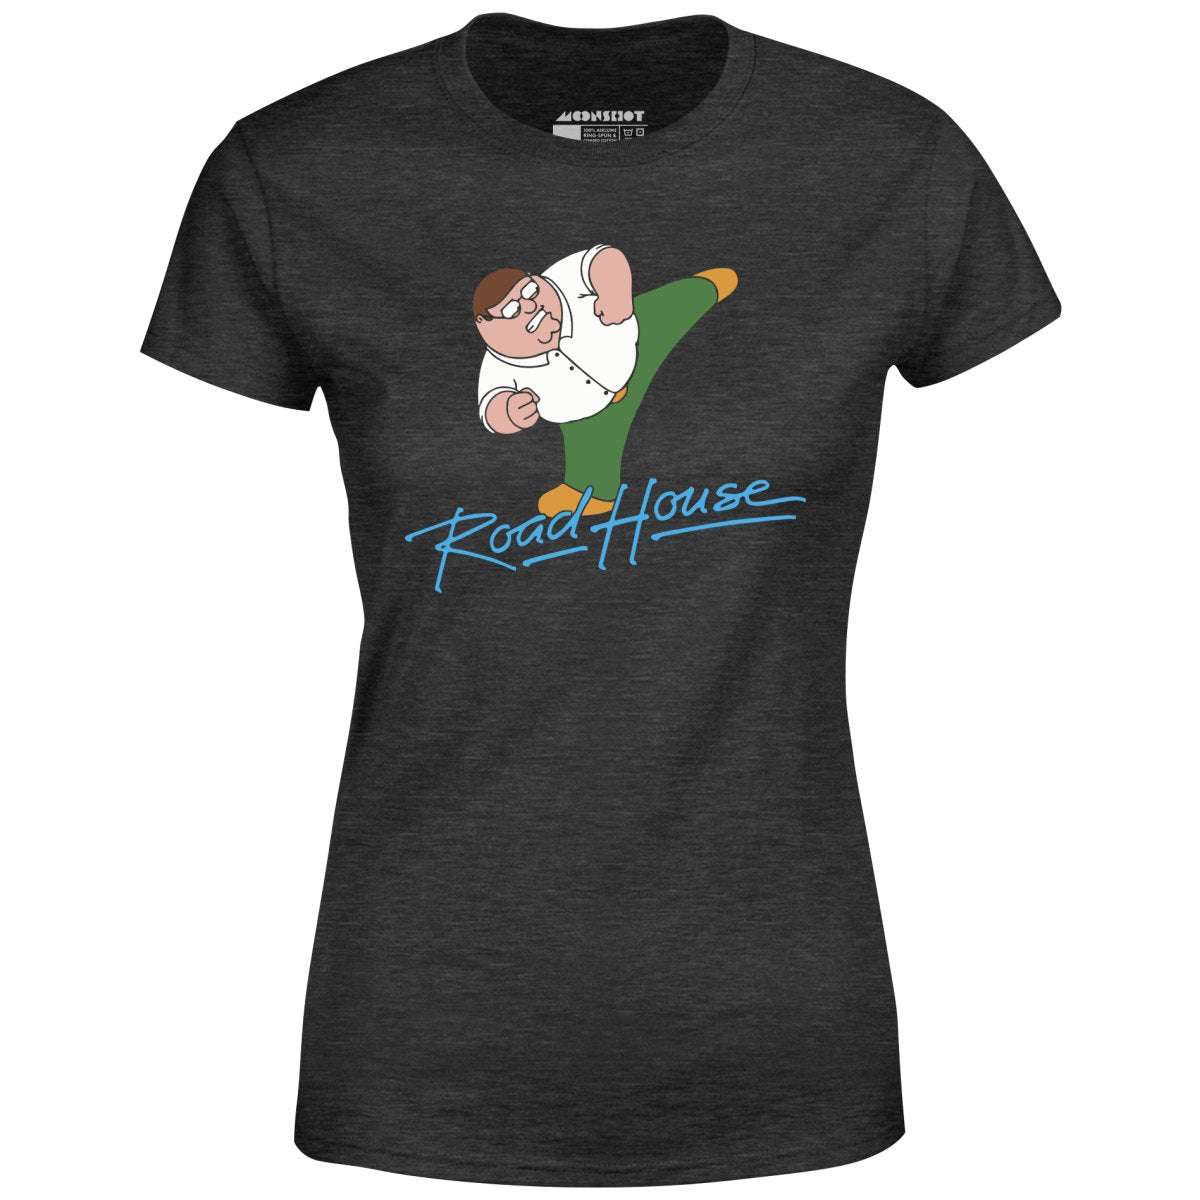 Peter Griffin Road House - Women's T-Shirt